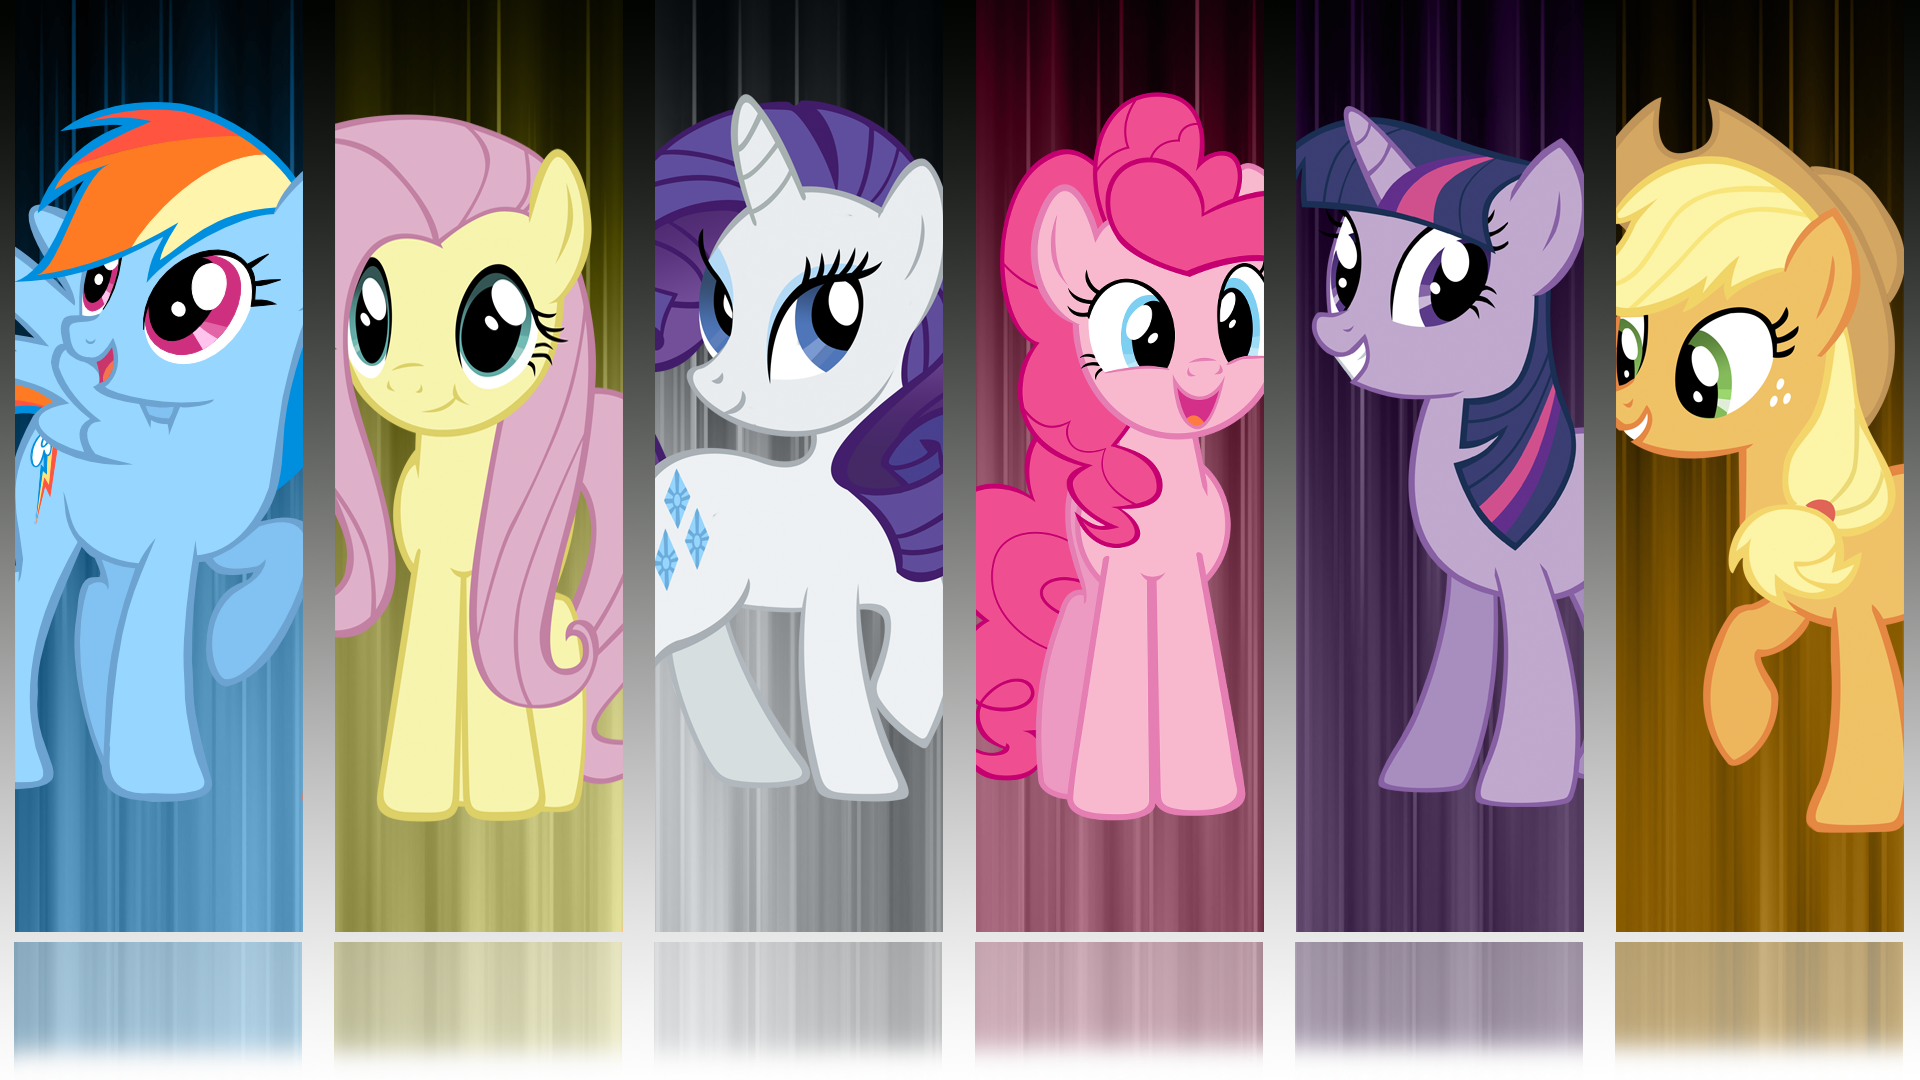 My Little Pony FIM 6 Mane Abstract Wallpaper by BlueDragonHans, HankOfficer, Mihaaaa, Shelmo69, Squirrel734, Takua770 and Tigersoul96